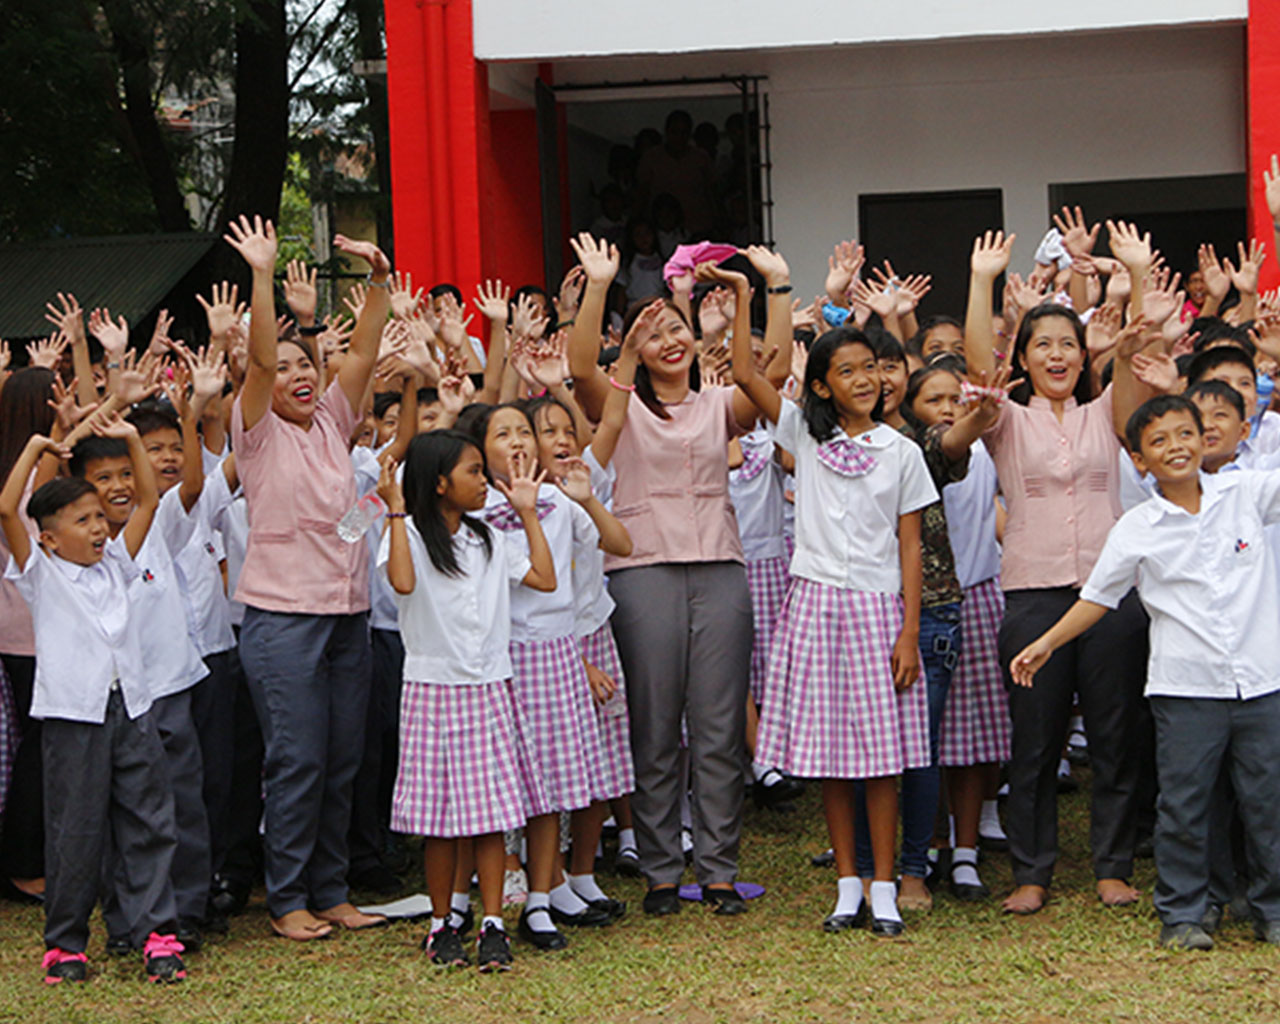 A large group of children waving